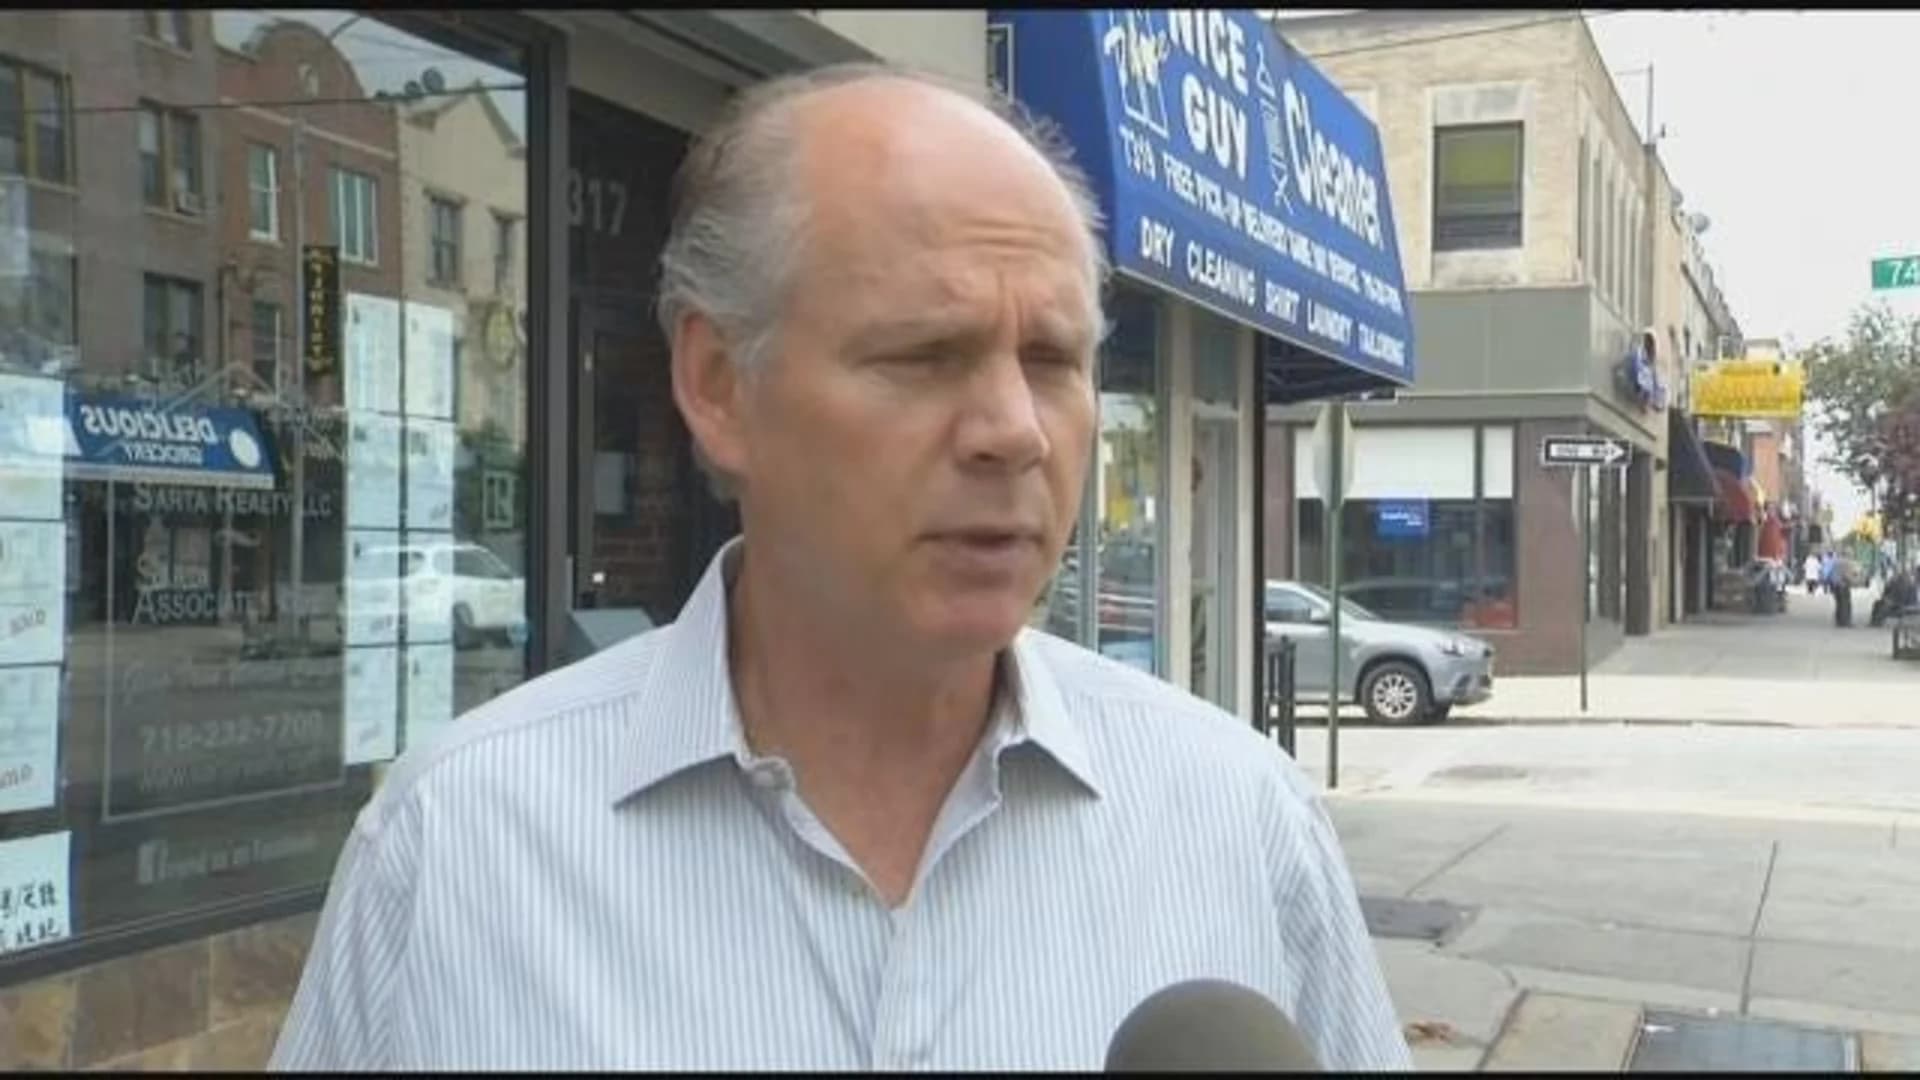 Rep. Donovan opposes American Health Care Act